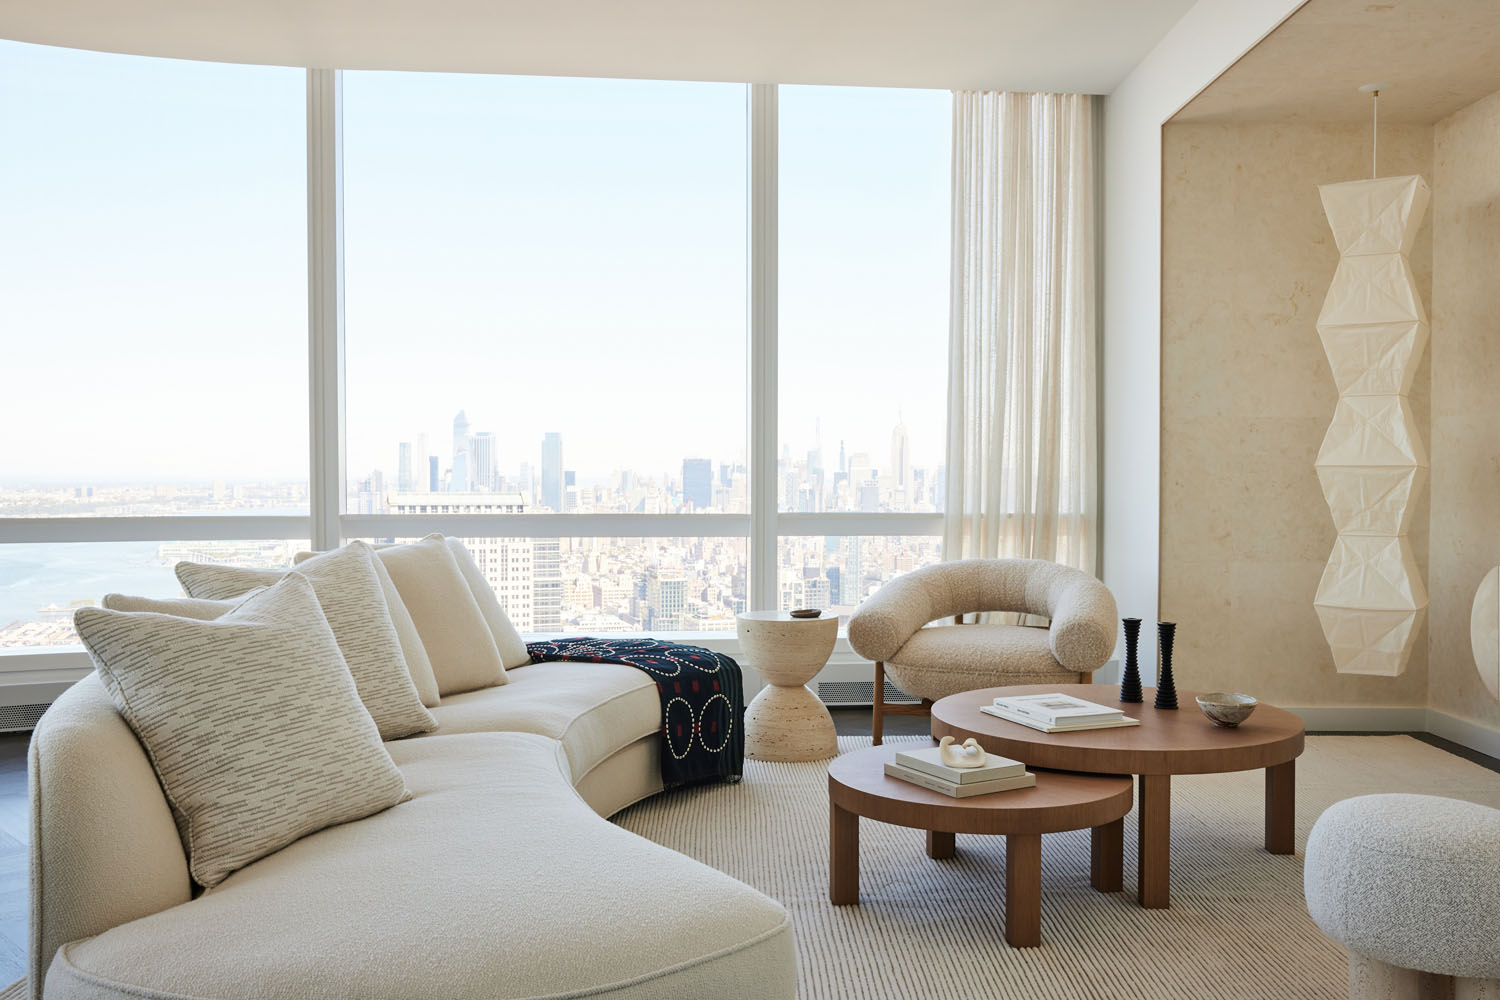 A modern living room by Jessica Gerstein featuring all matching beige furniture